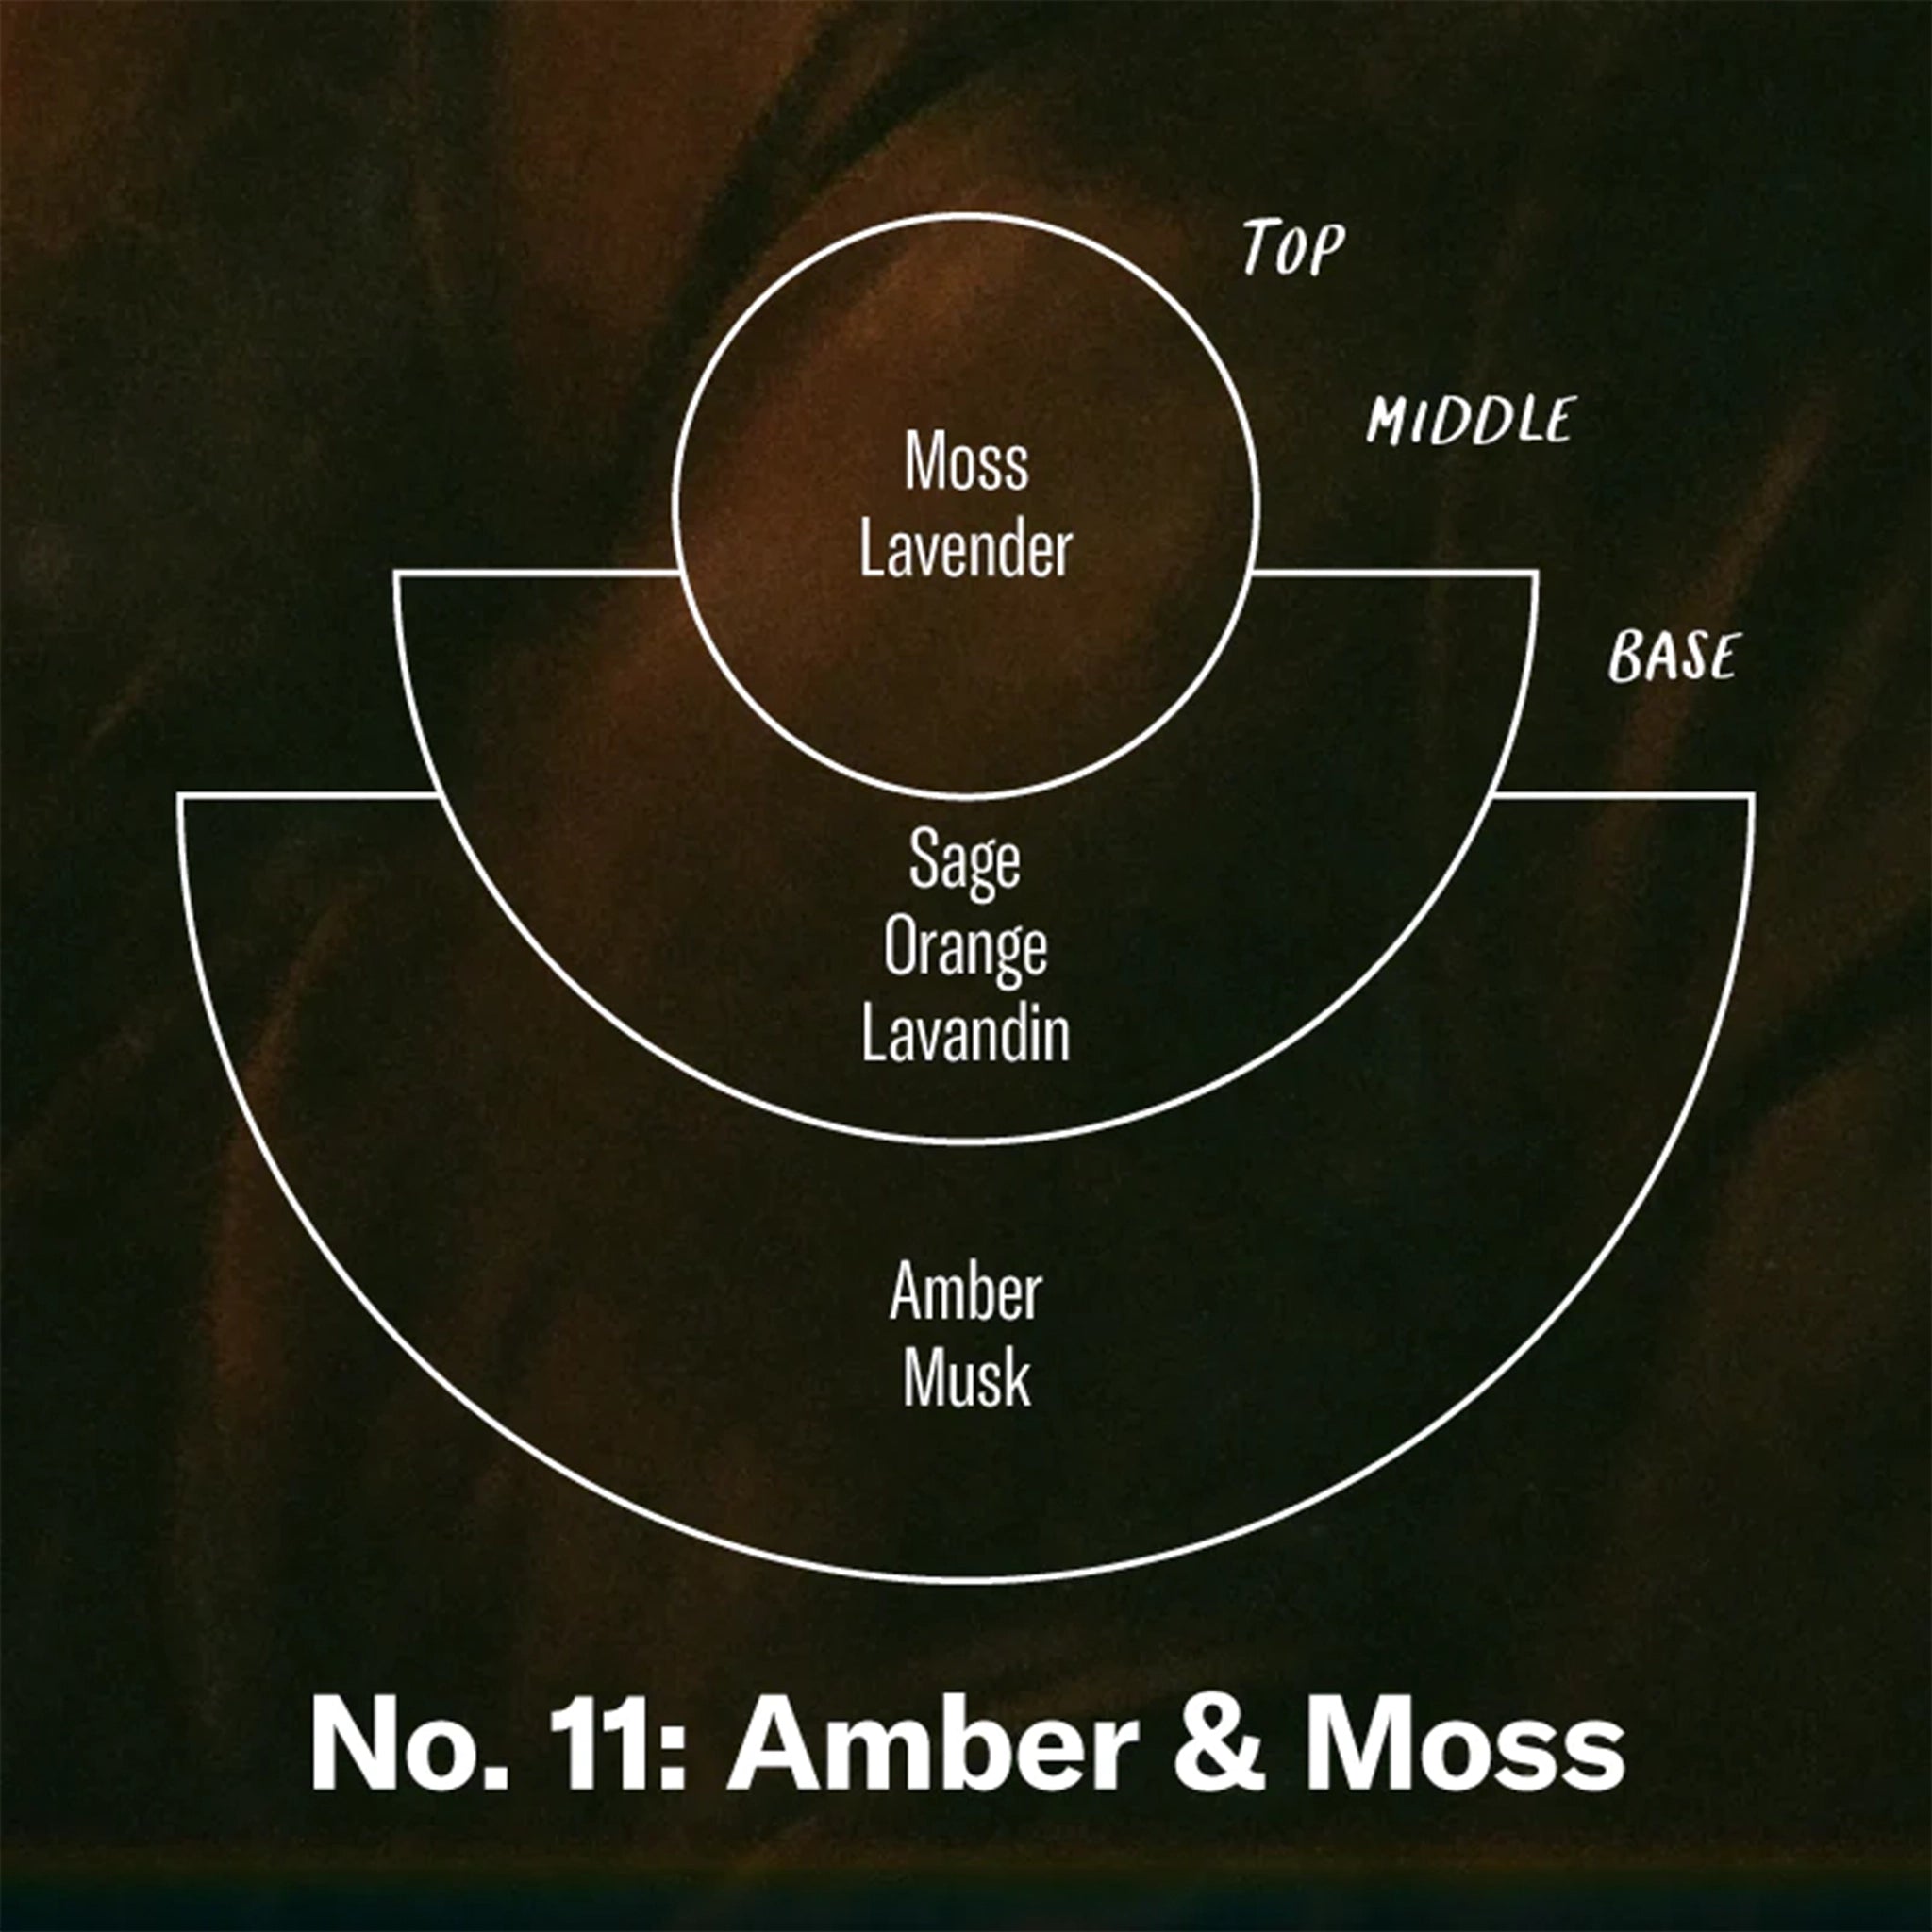 A graphic showing the notes of the candle. The top notes include moss and lavender, the middle notes are sage, orange and lavandin, and the base notes are listed as amber and musk.